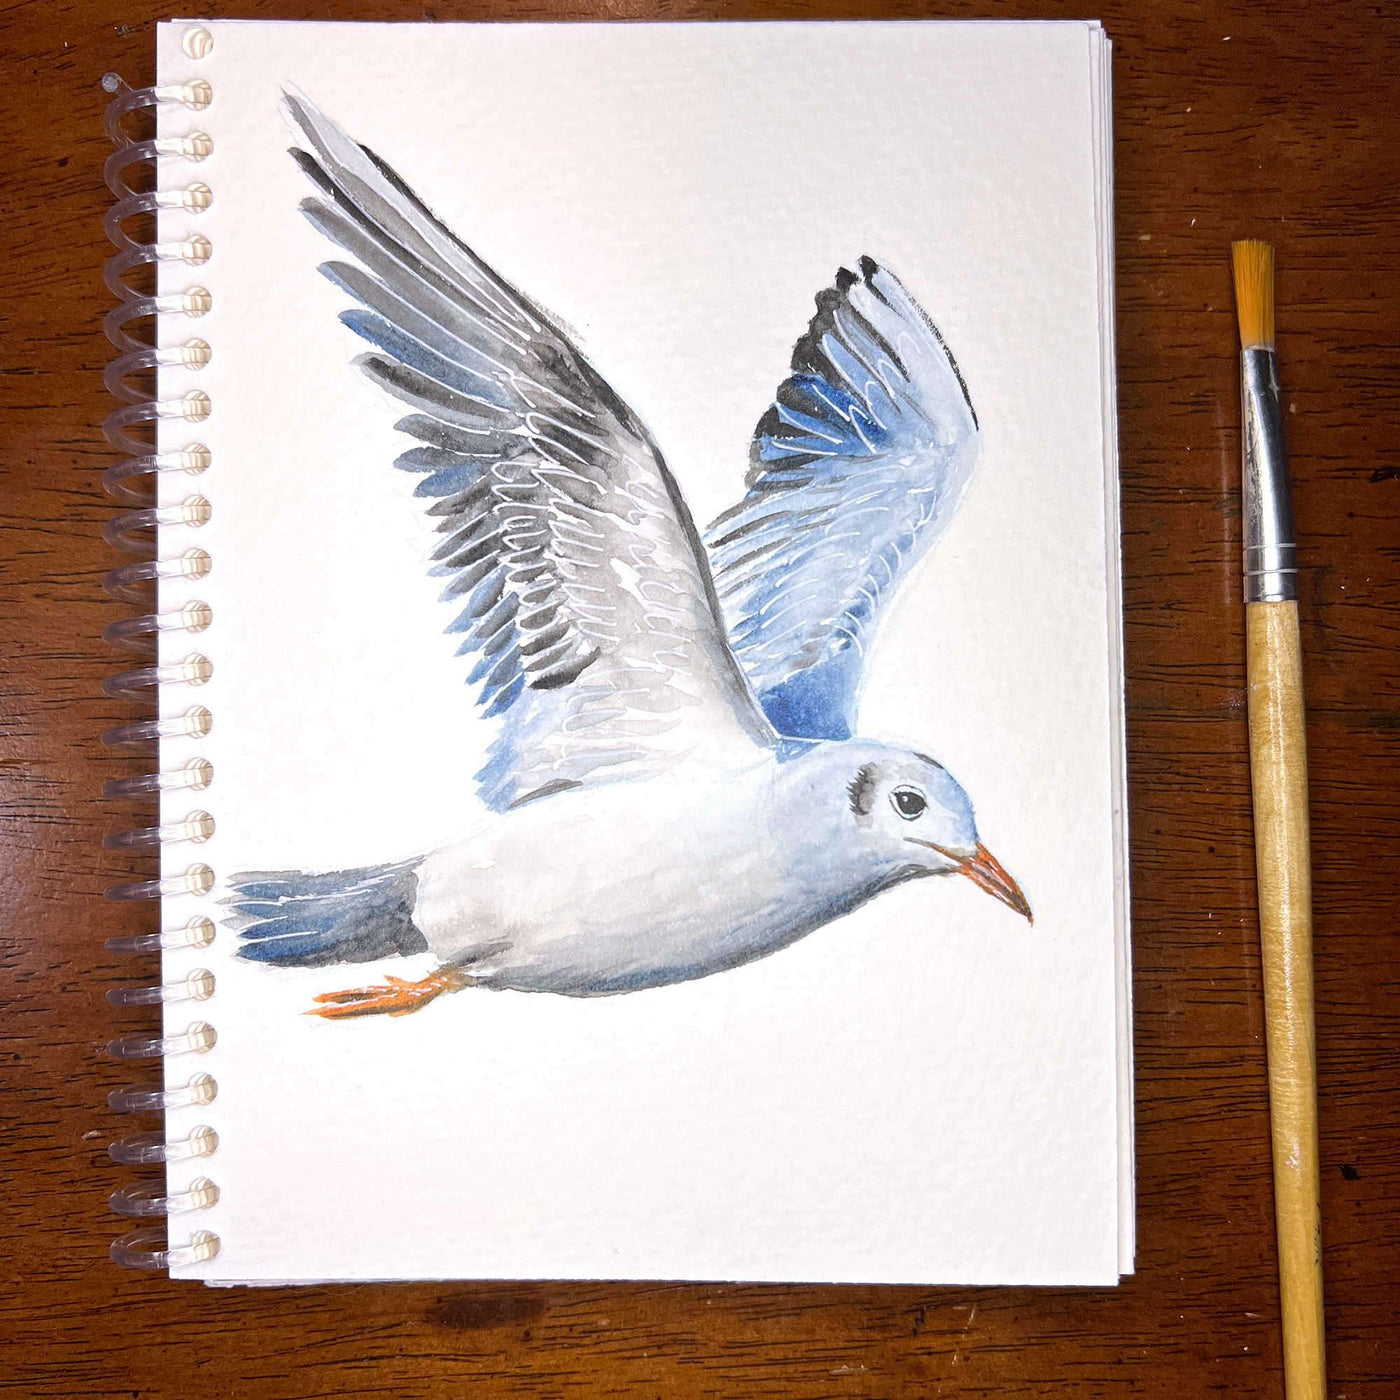 Watercolor sketch of a seagull with wings spread wide in mid-flight, full of dynamic movement.